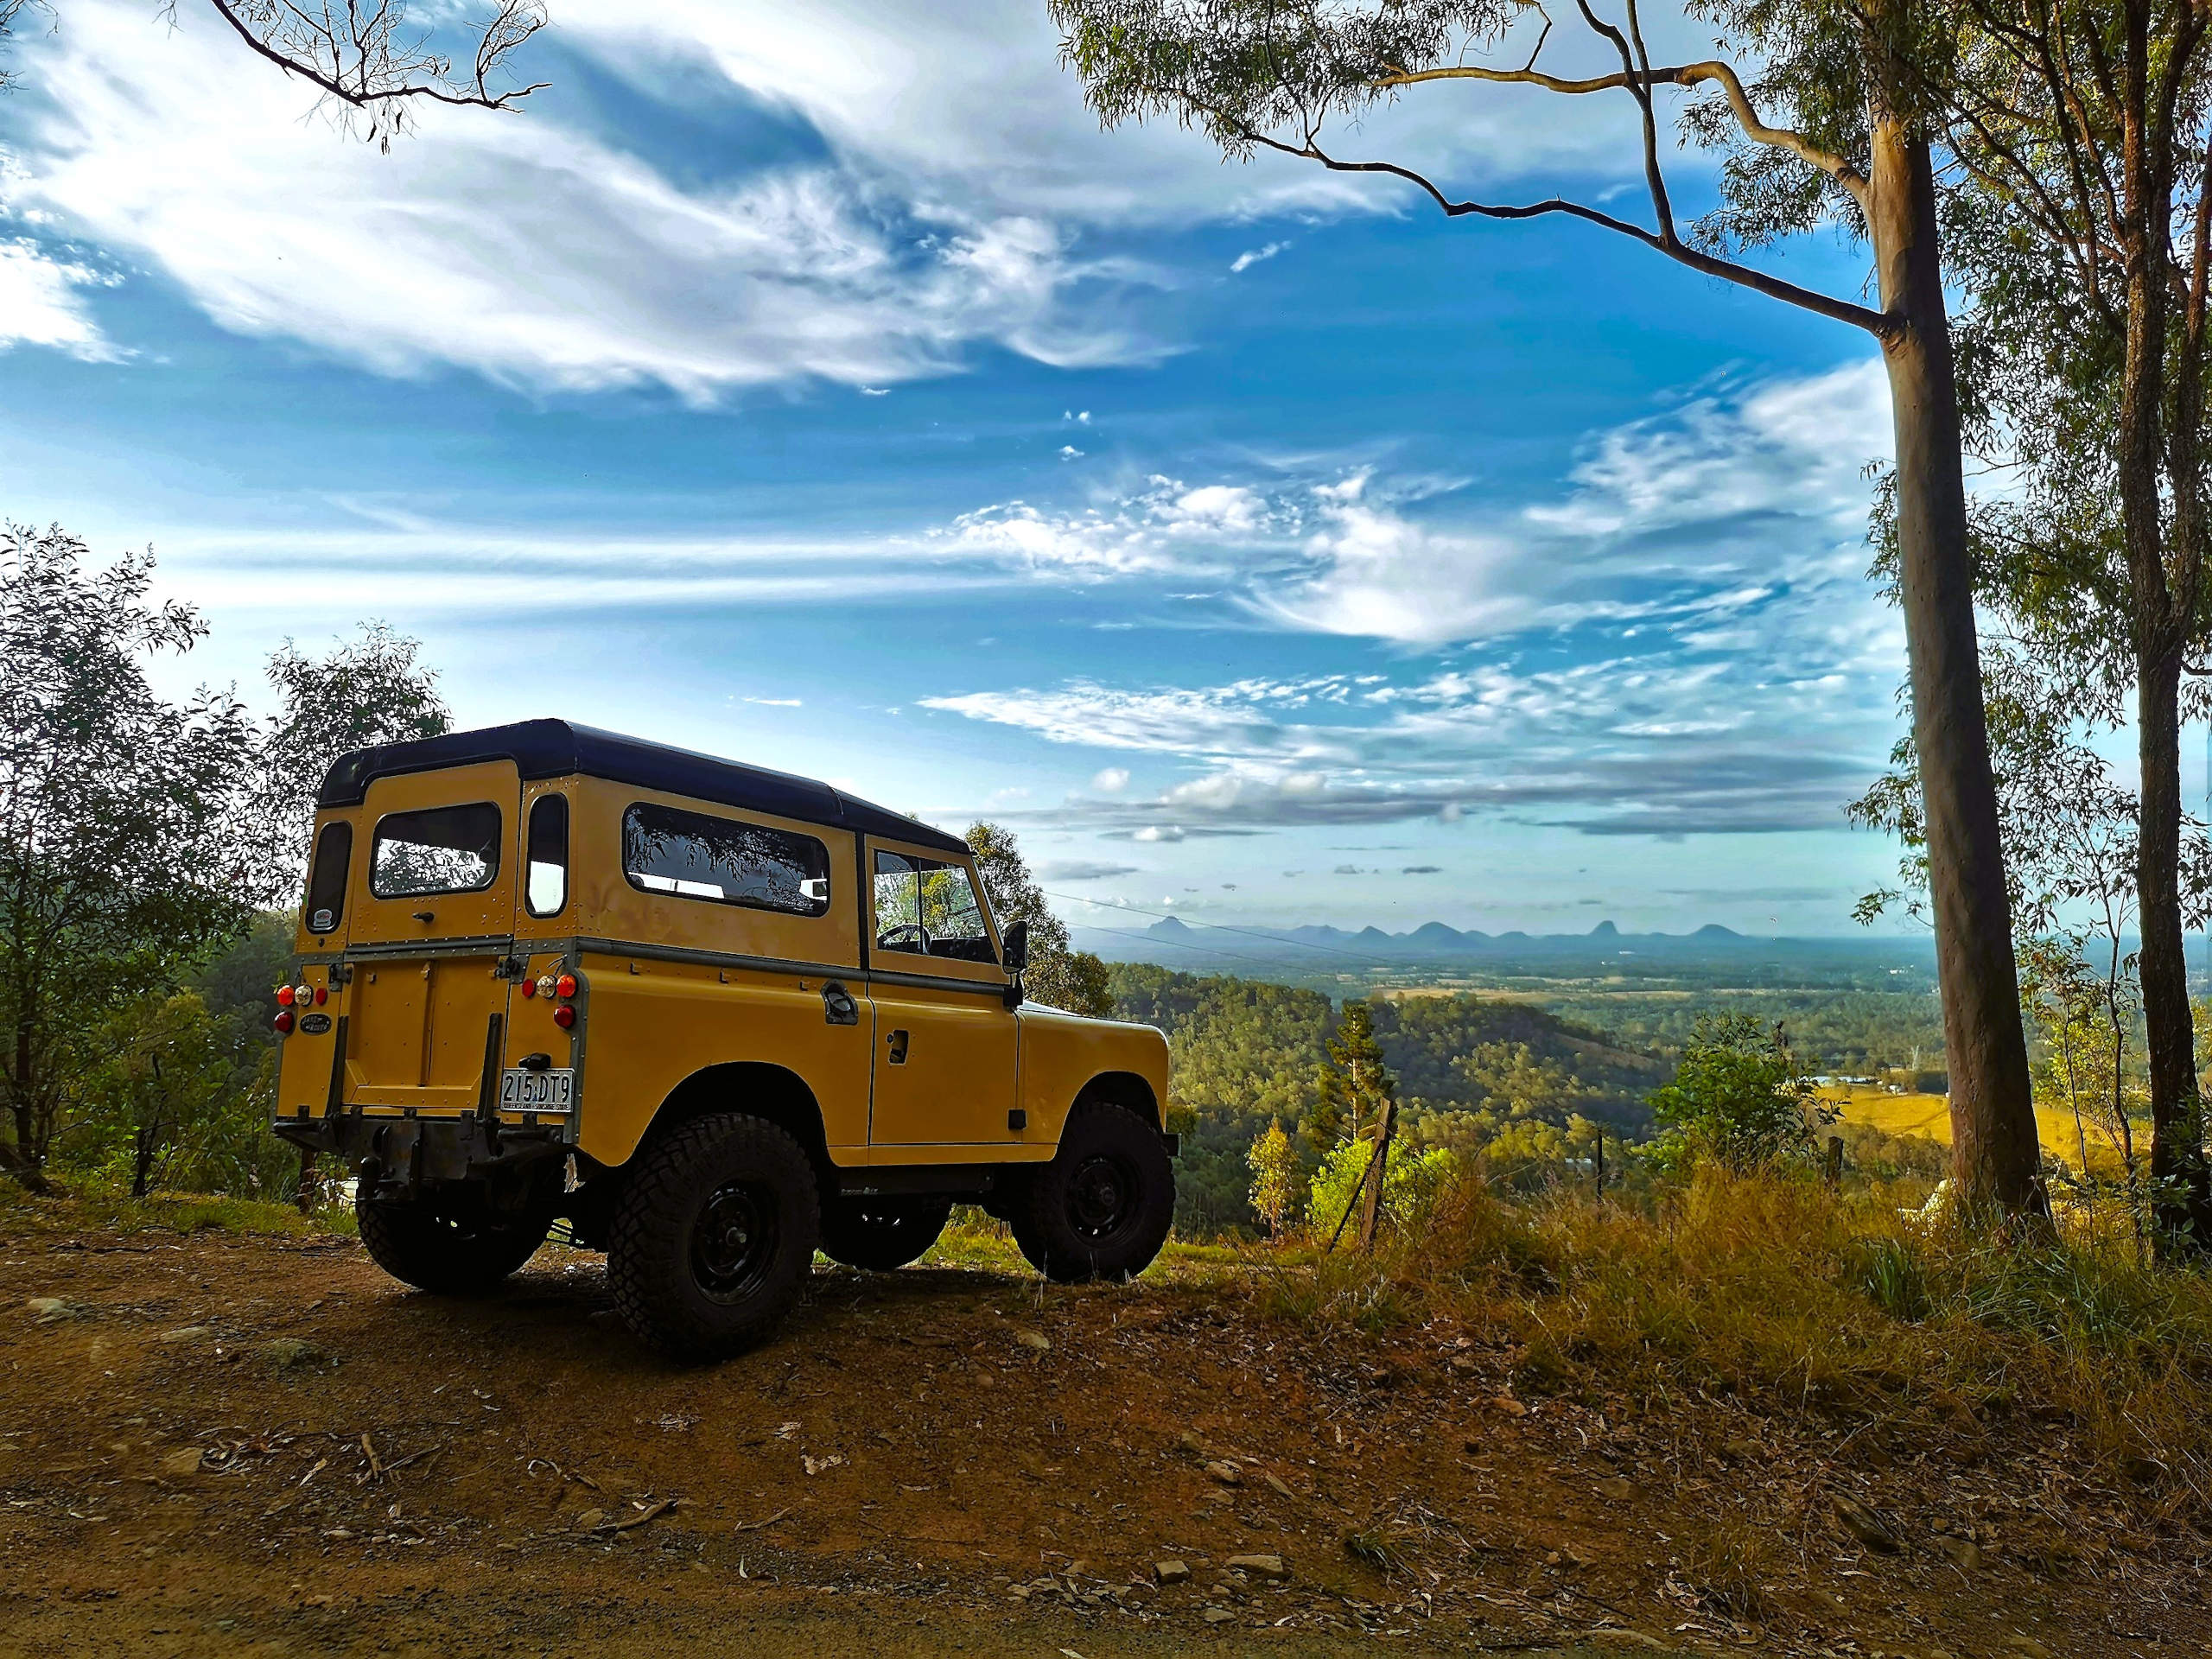 The 1973 electric Land Rover at a scenic spot overlooking Moreton Bay and the Glasshouse Mountains.